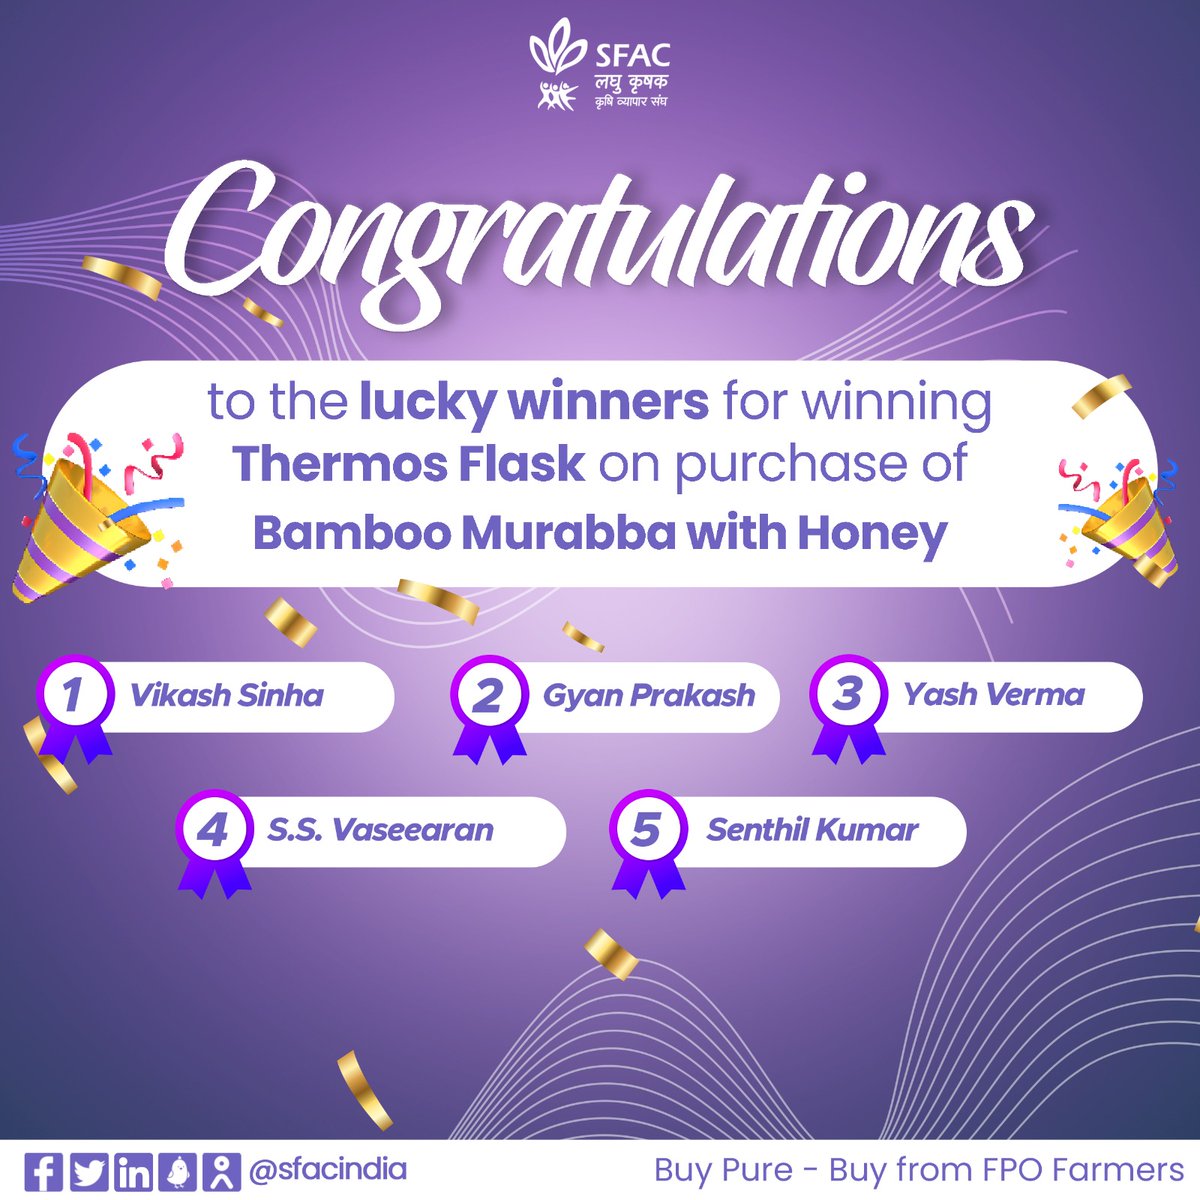 Congratulations to the lucky winners for winning a thermos flask 🥳on purchase of bamboo murabba with honey. Both will be shipped separately to each buyer. Enjoy the delicious bamboo murabba with natural honey. Keep buying from FPO farmers. Follow us for such giveaways.